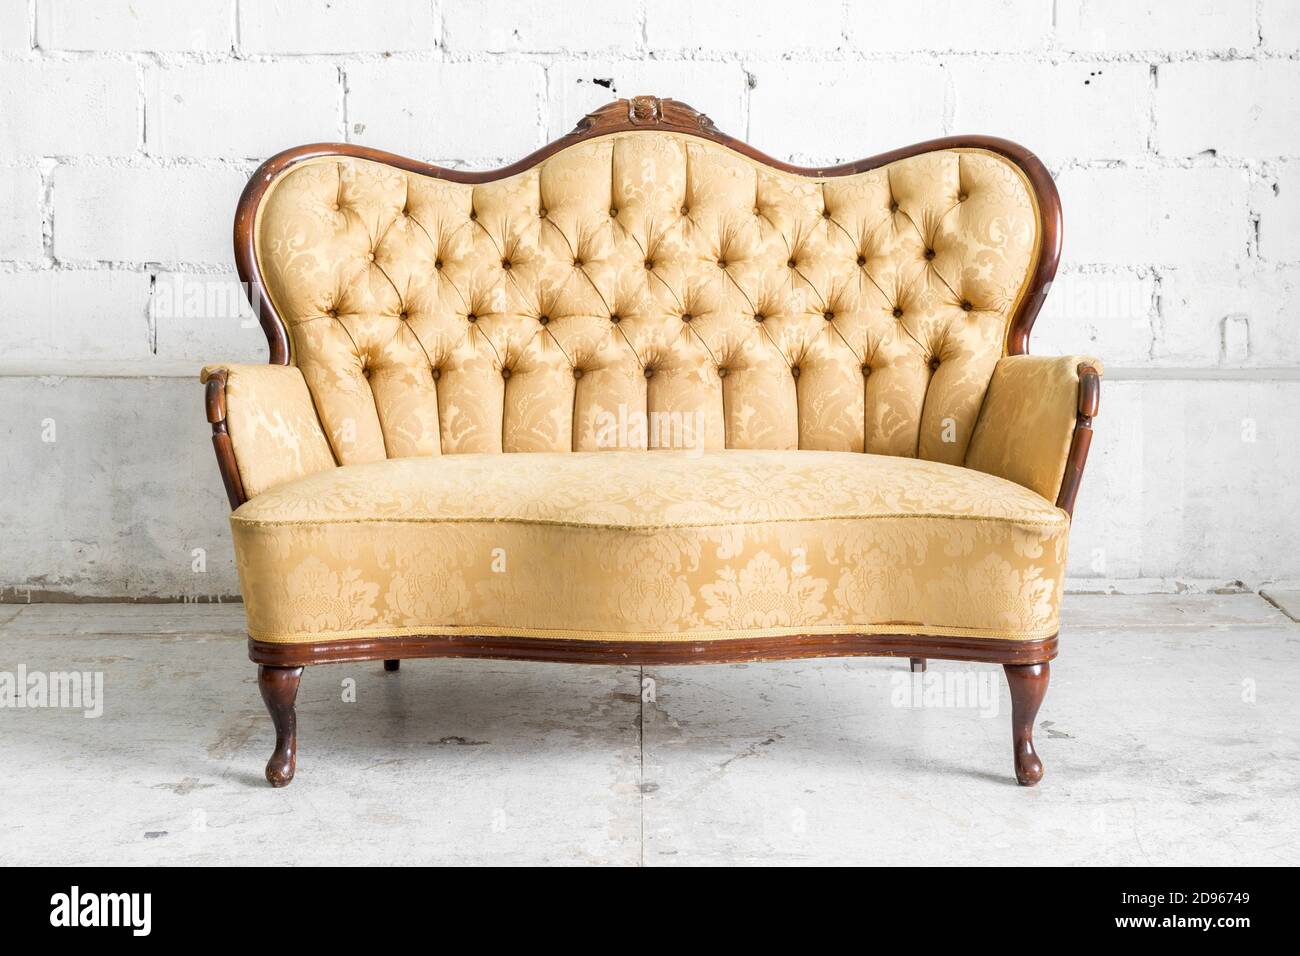 Linguistics cash Generator Brown Retro classical style sofa couch in vintage room Stock Photo - Alamy